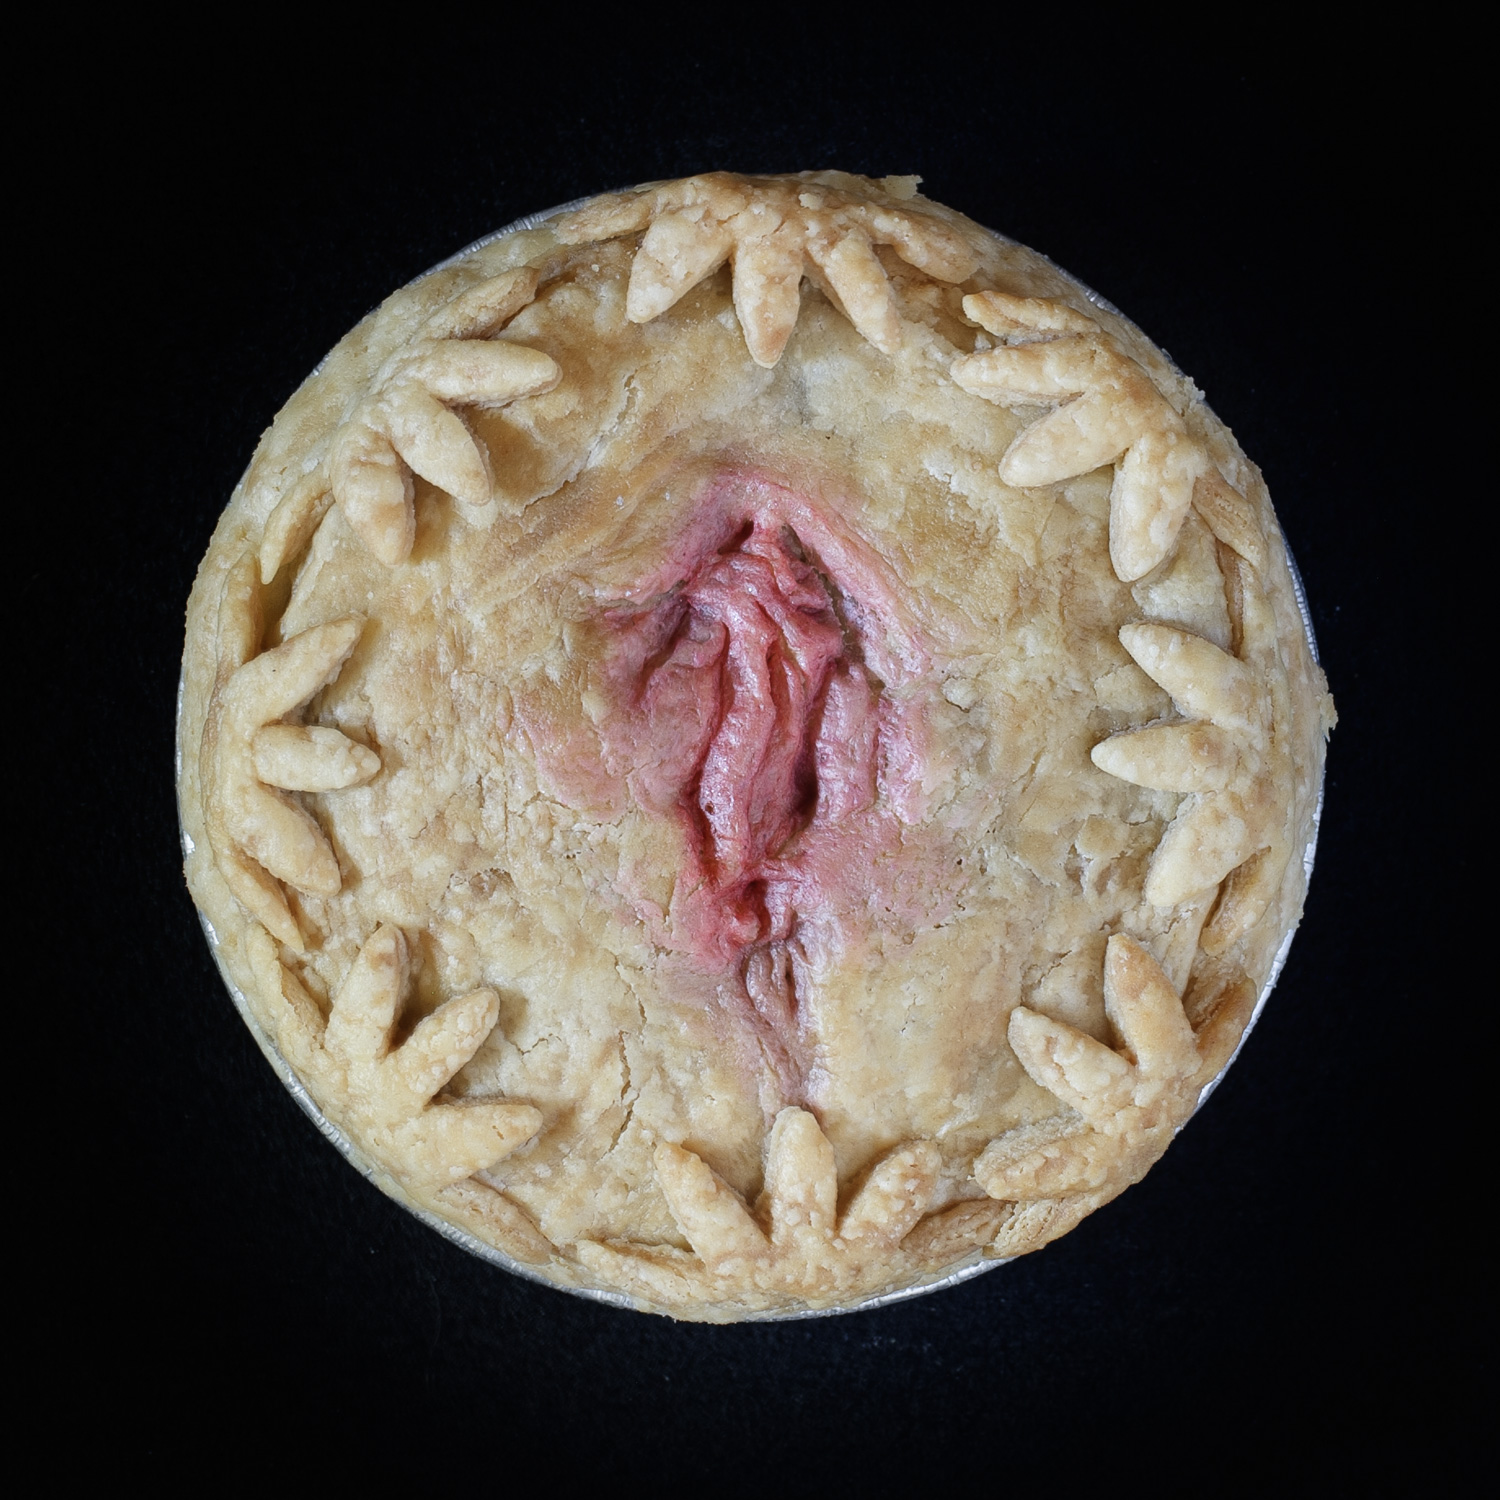 A baked vulva pie on a black background. The pie is decorated with cut out flowers and hand sculpted vulva art, painted realistically.